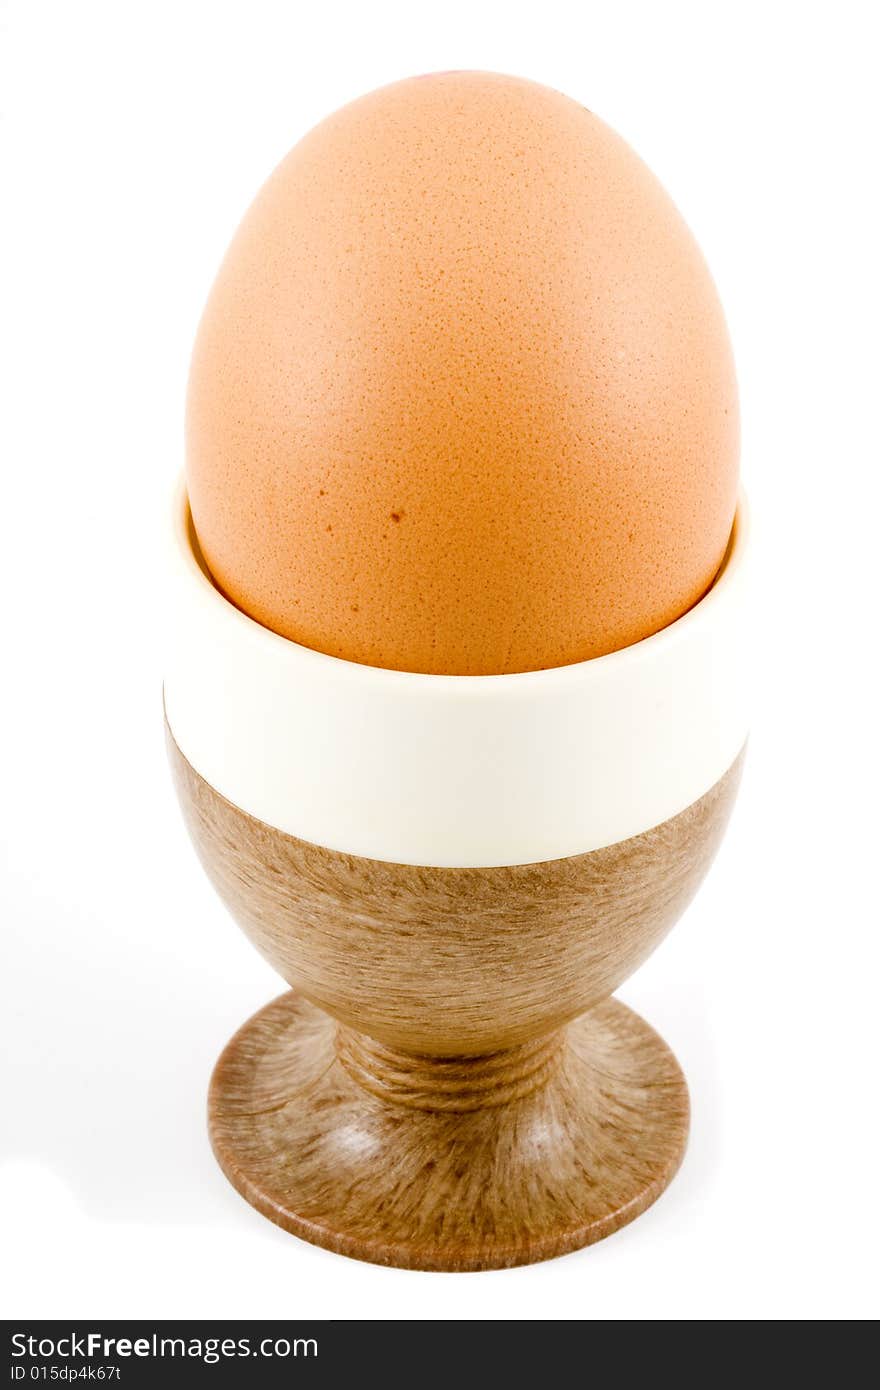 A brown soft boiled egg in the eggcup